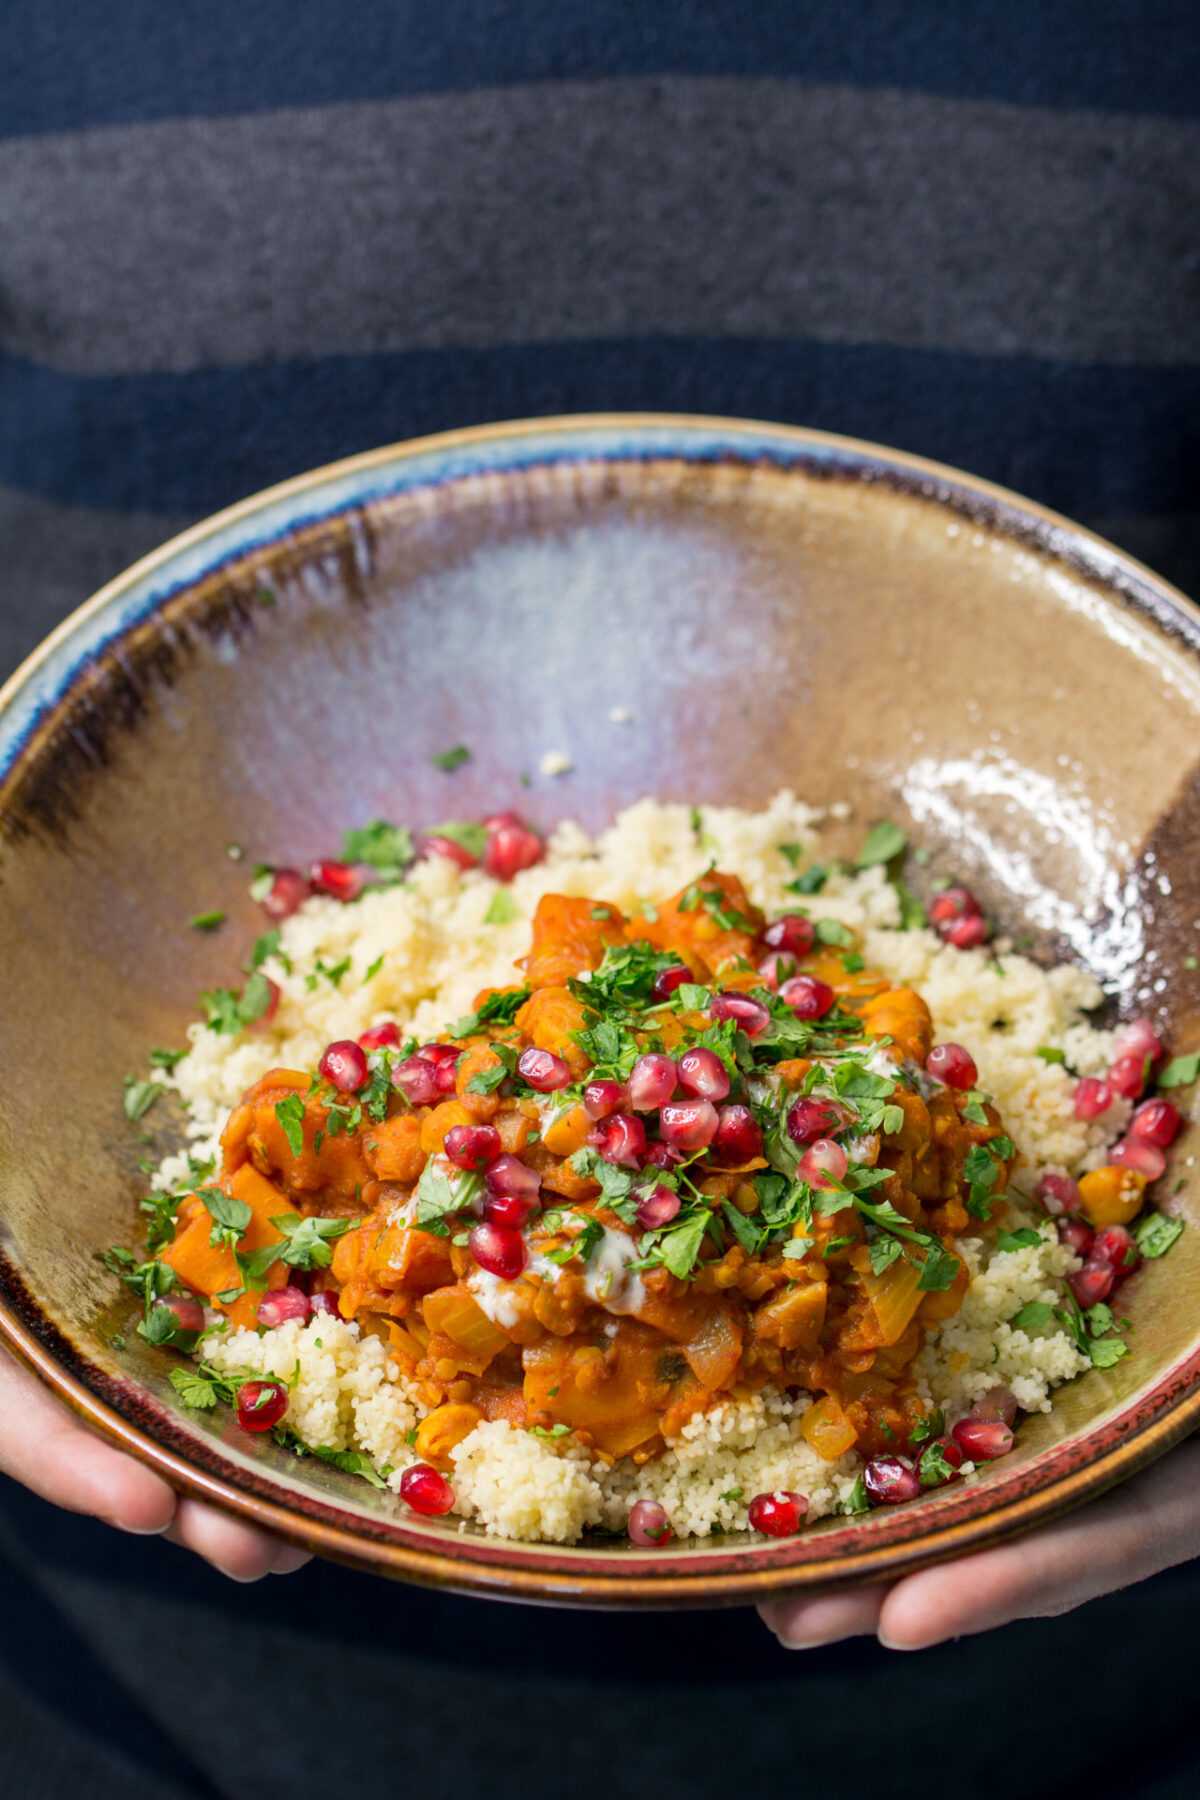 Sweet Potato and Chickpea Moroccan Style Stew in a tan glazed dish topped with pomegranate seeds being held out in a woman's hands.